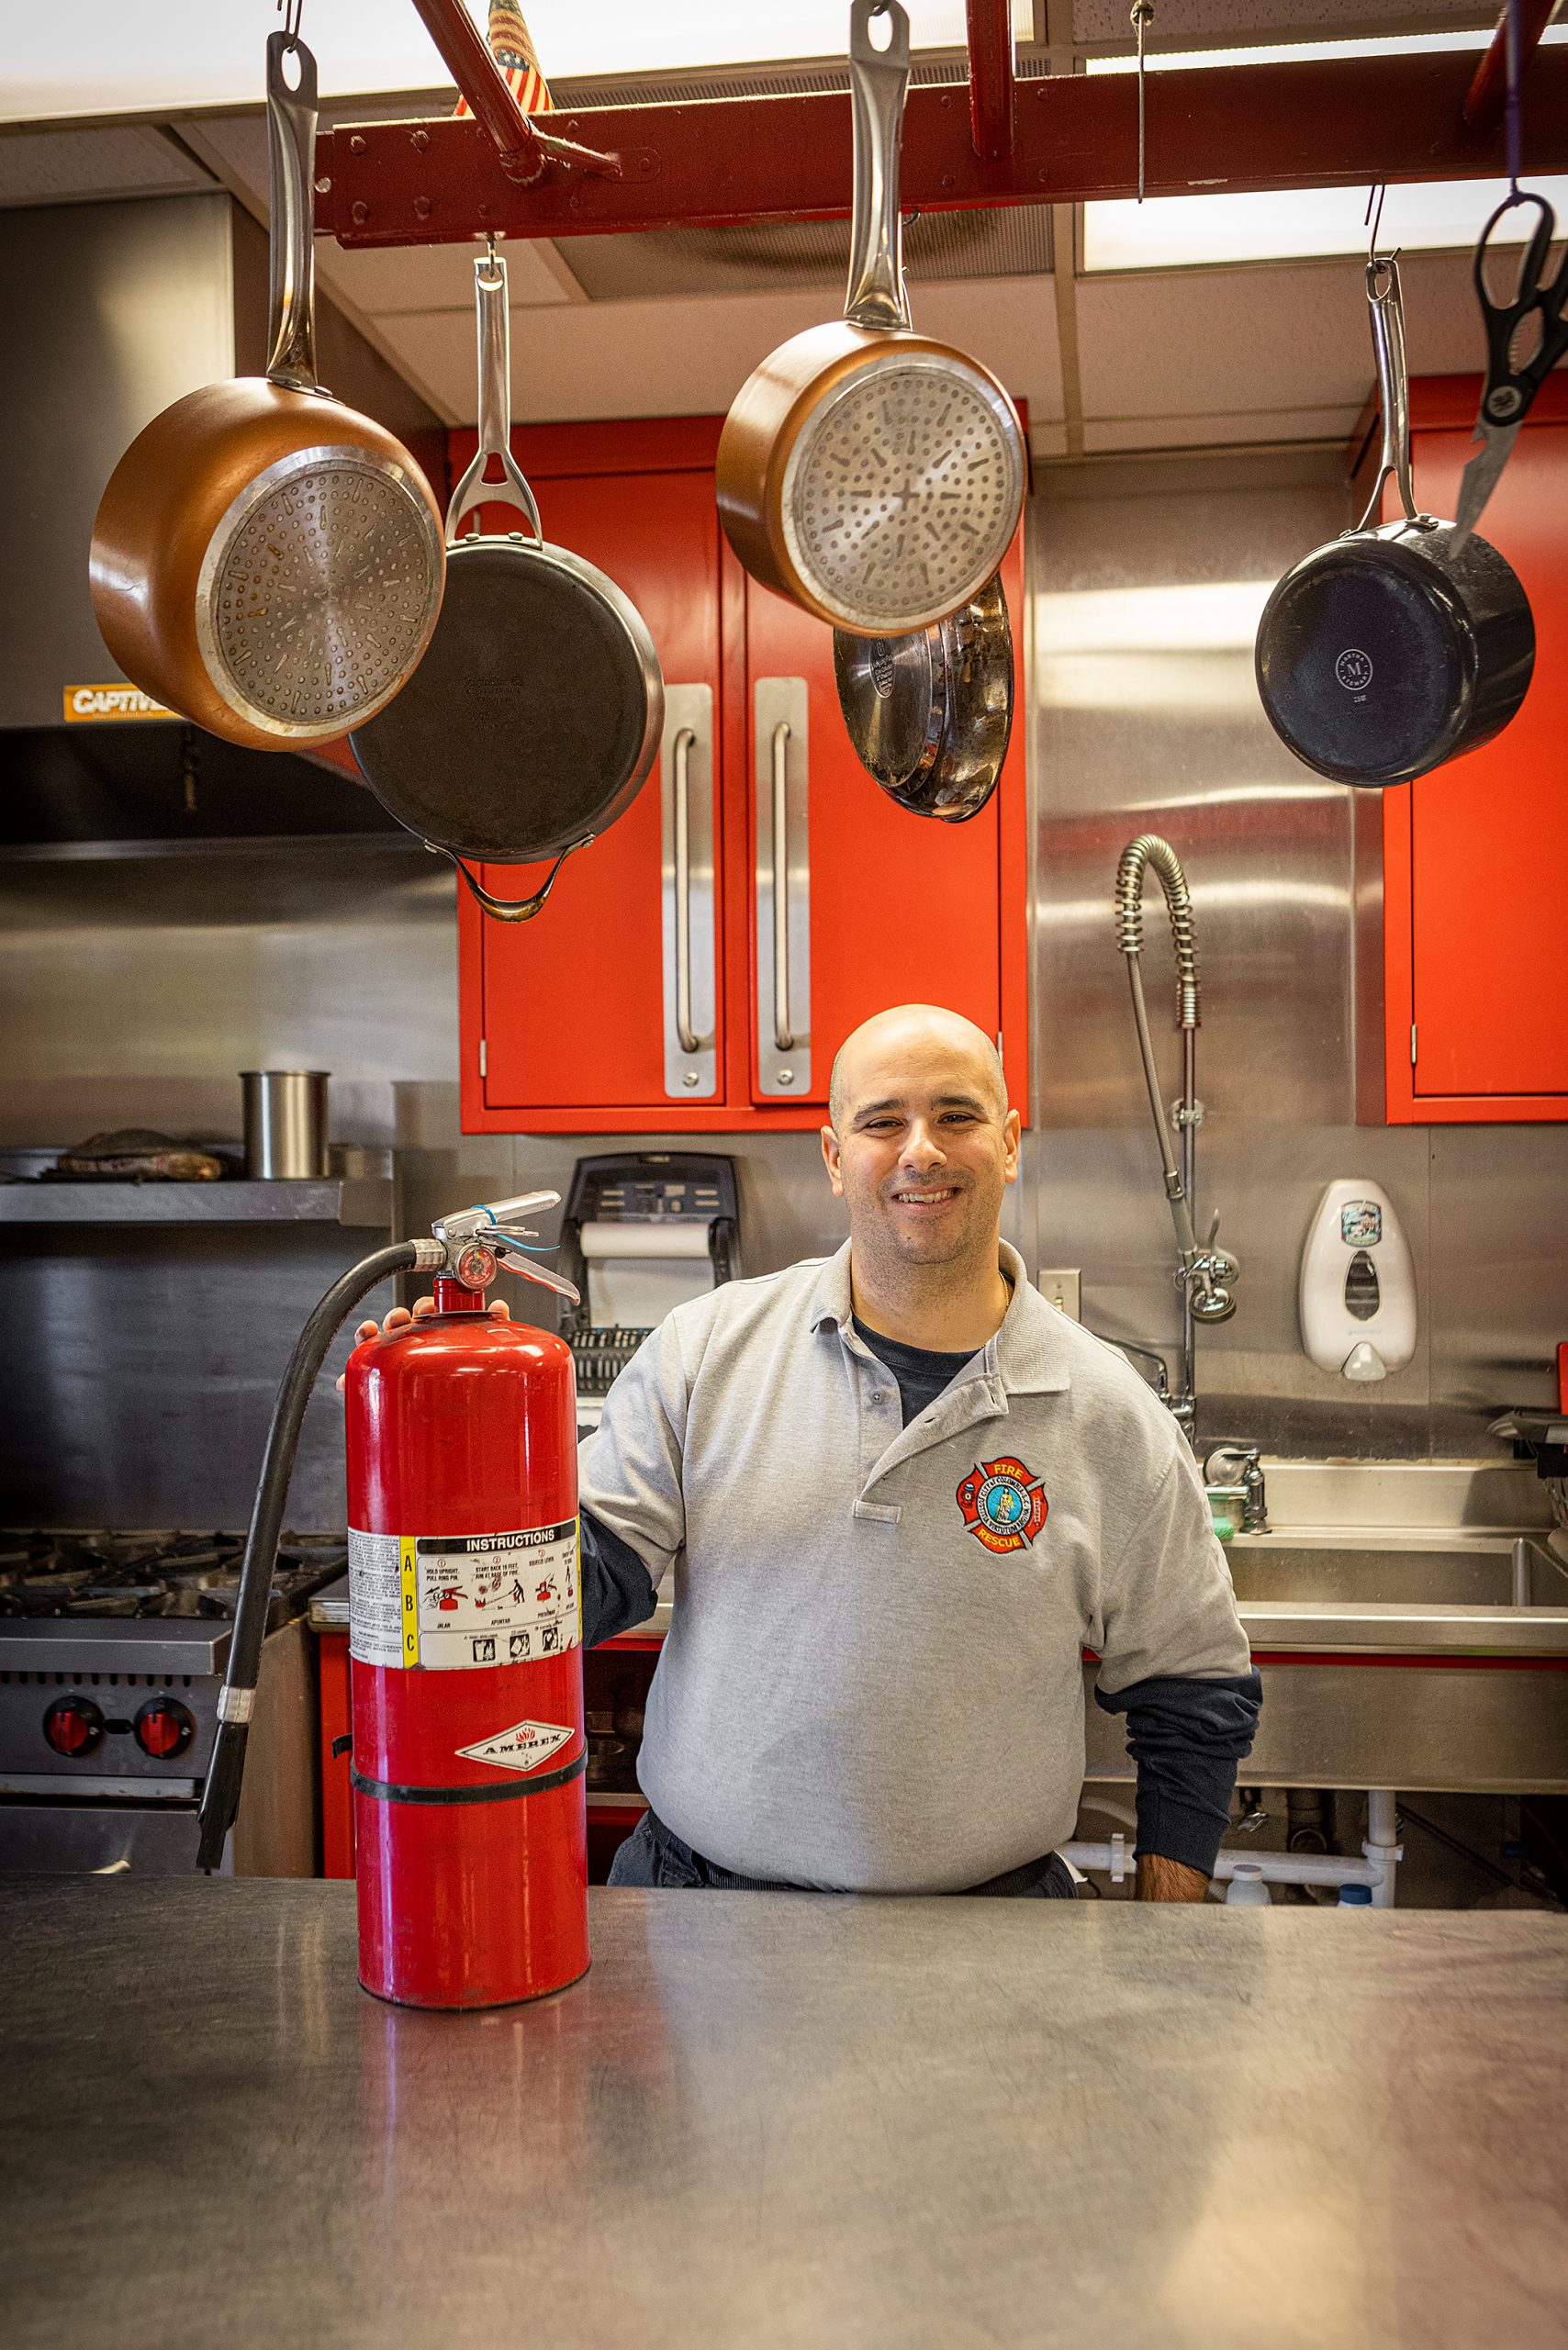 Be sure to P.A.S.S. when you operate your extinguisher: (P)ull out the pin, (A)im at the base of the fire, (S)queeze the trigger, and (S)weep back and forth across the fire until it is completely extinguished, says Michael A. DeSumma, Jr., public information officer with the Columbia-Richland Fire Department.